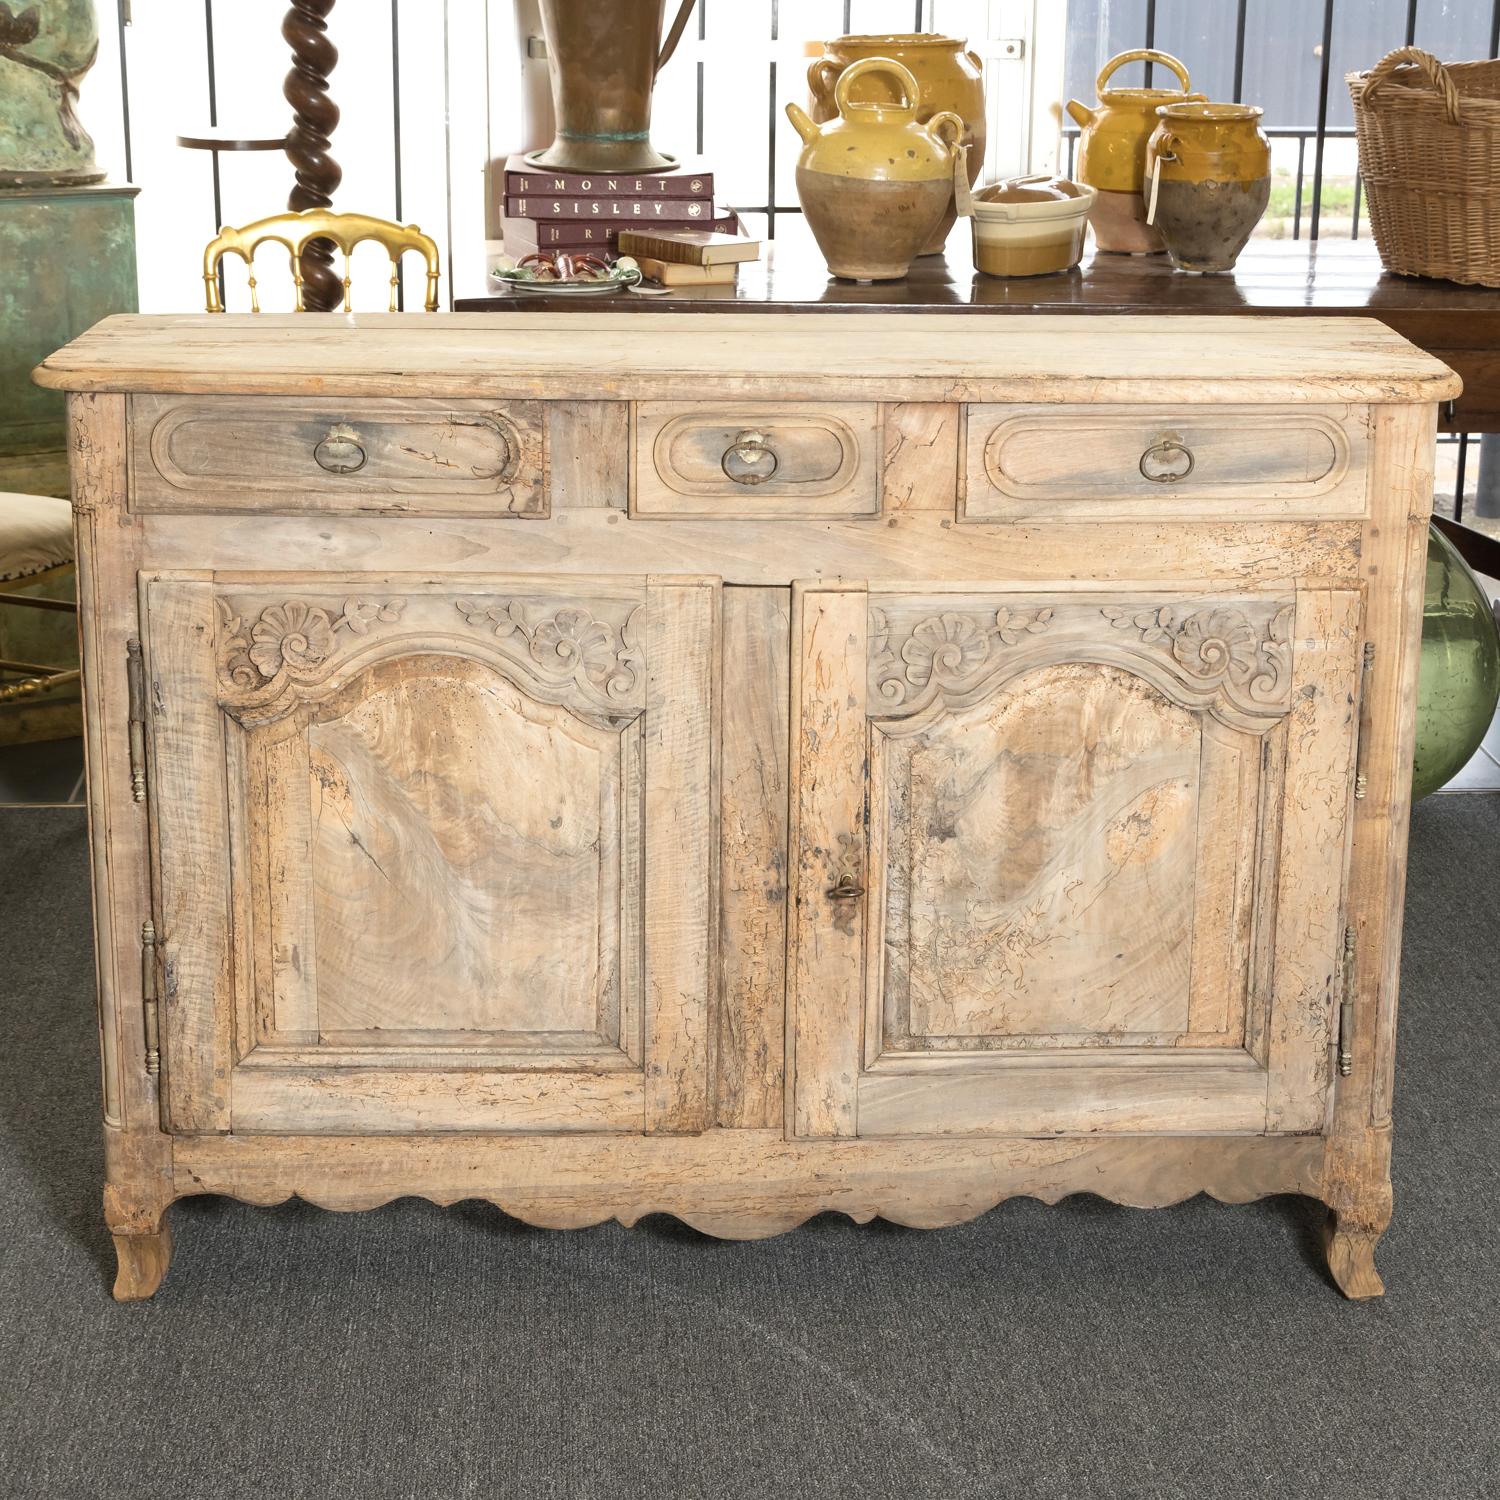 An 18th century French Country Louis XV period carved buffet handcrafted of solid walnut that's been bleached or washed to a natural finish by talented artisans in the Normandy region, circa 1760s. This charming washed oak buffet, with it's crusty,